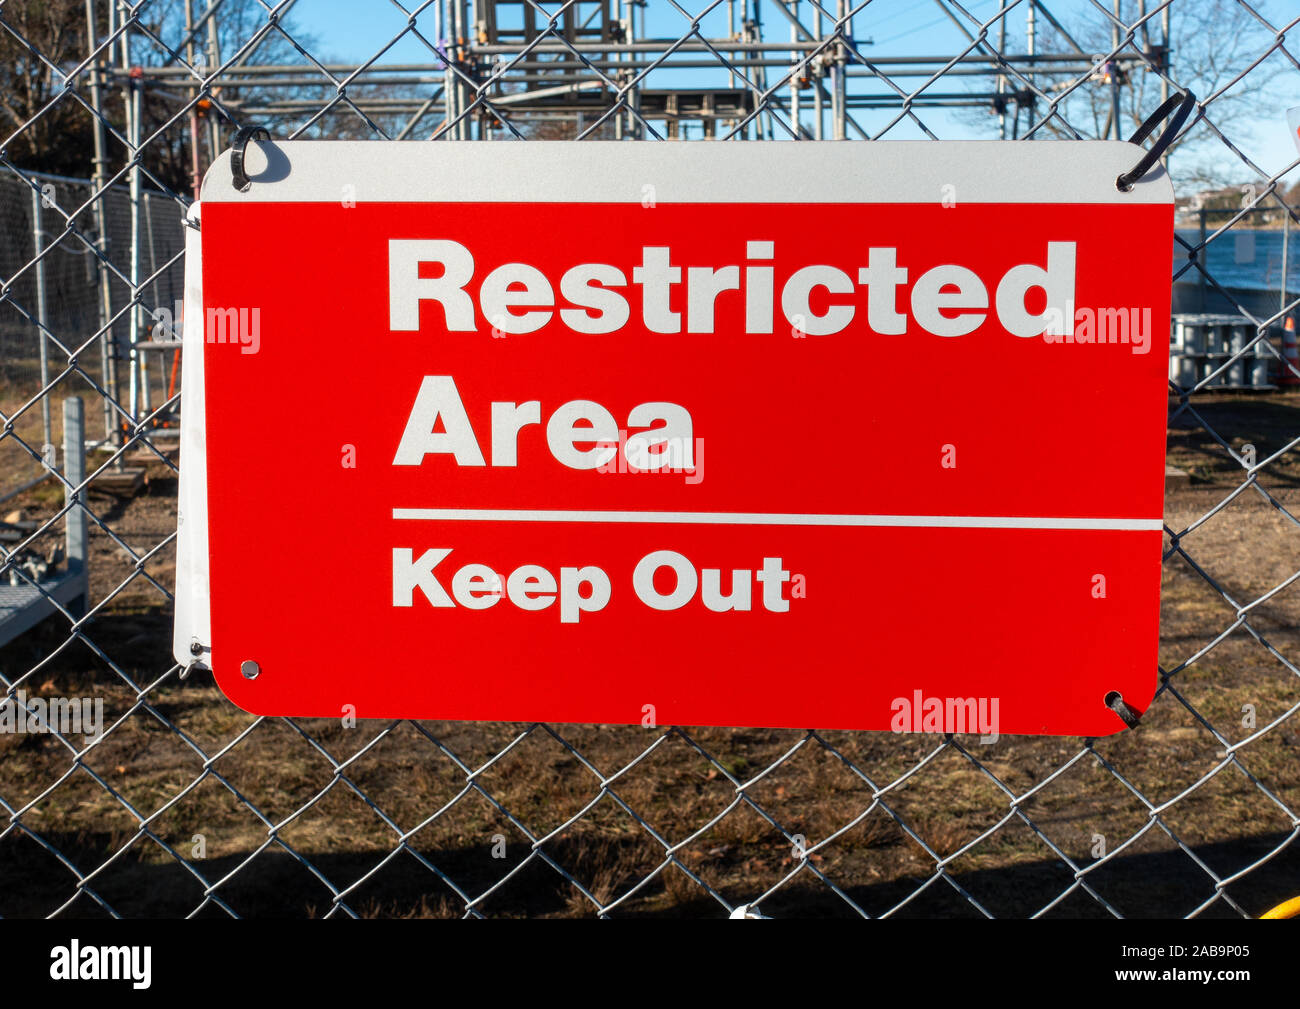 Restricted Area Keep Out red and white sign on fence at construction site. Stock Photo